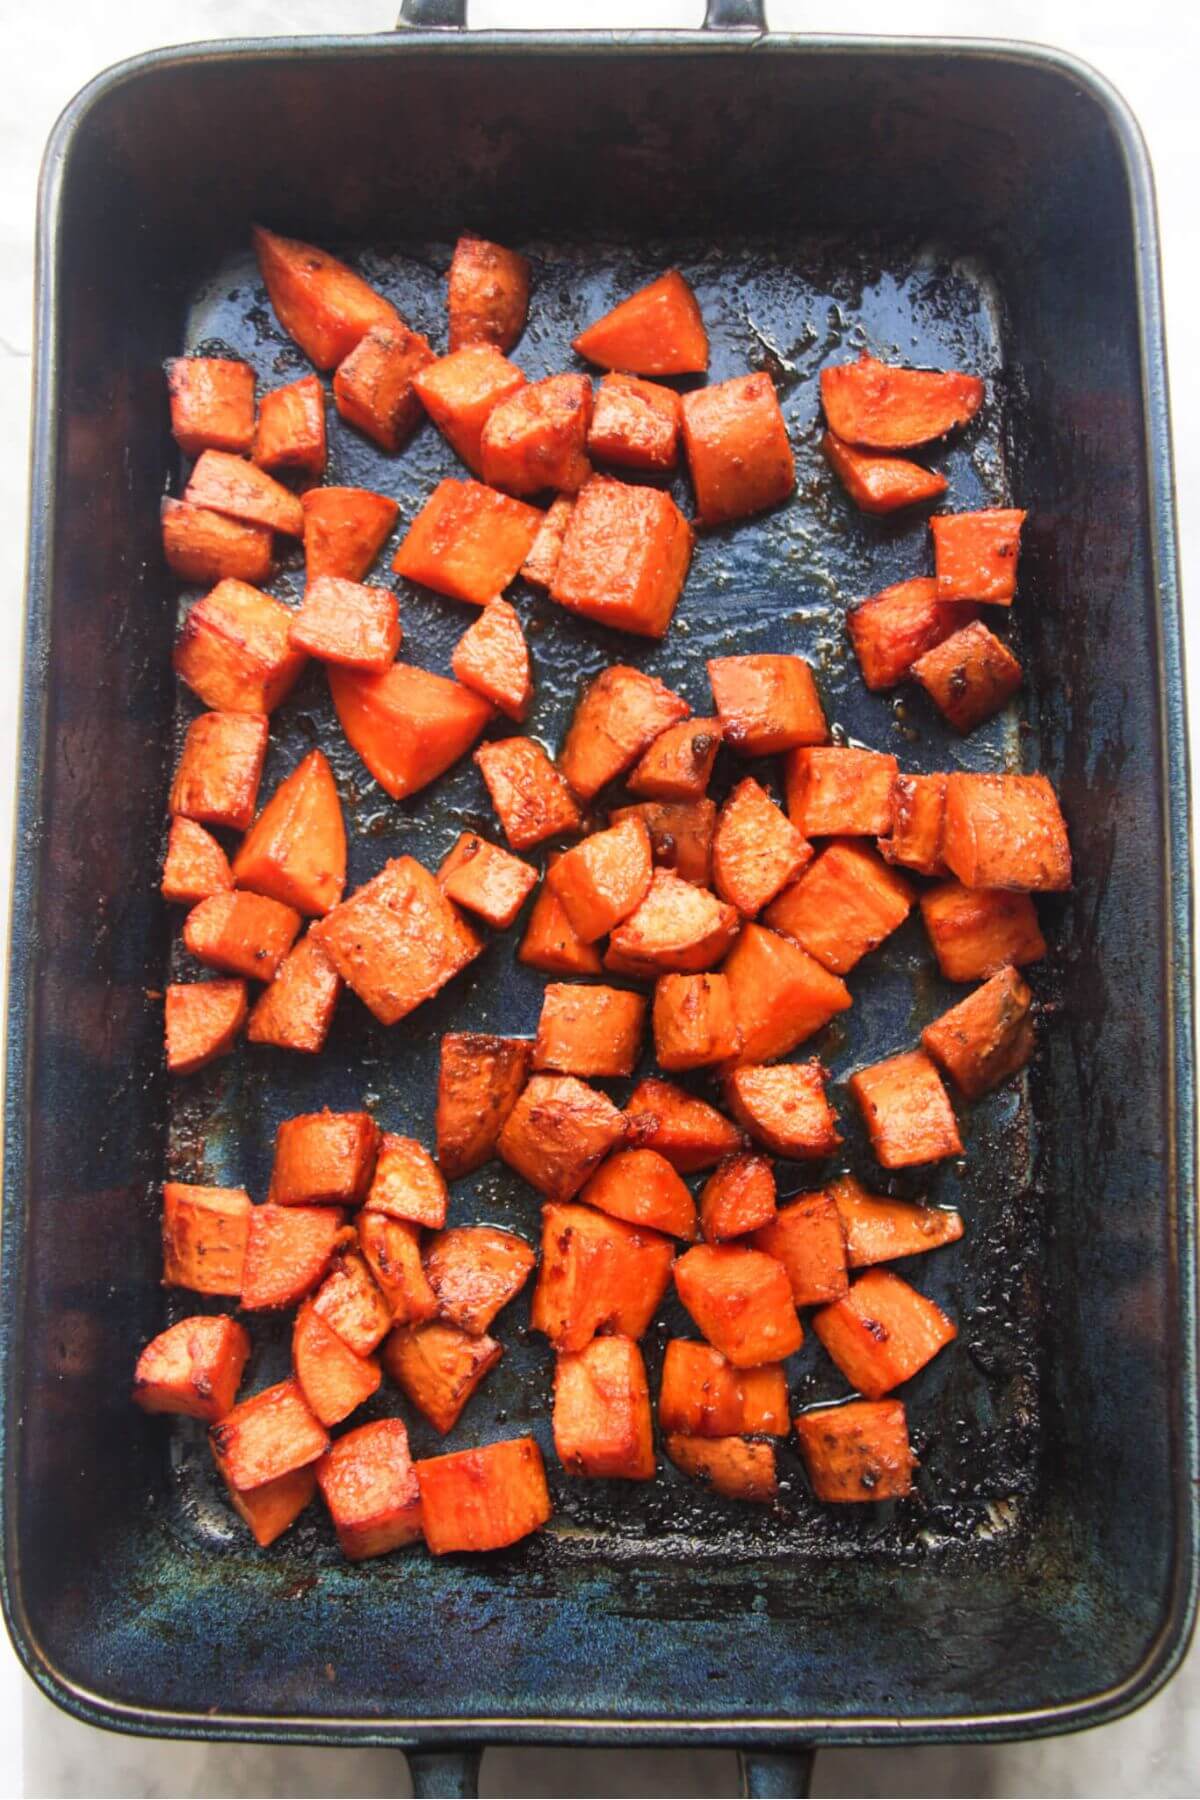 Chunks of miso roasted sweet potatoes in a large blue oven dish.